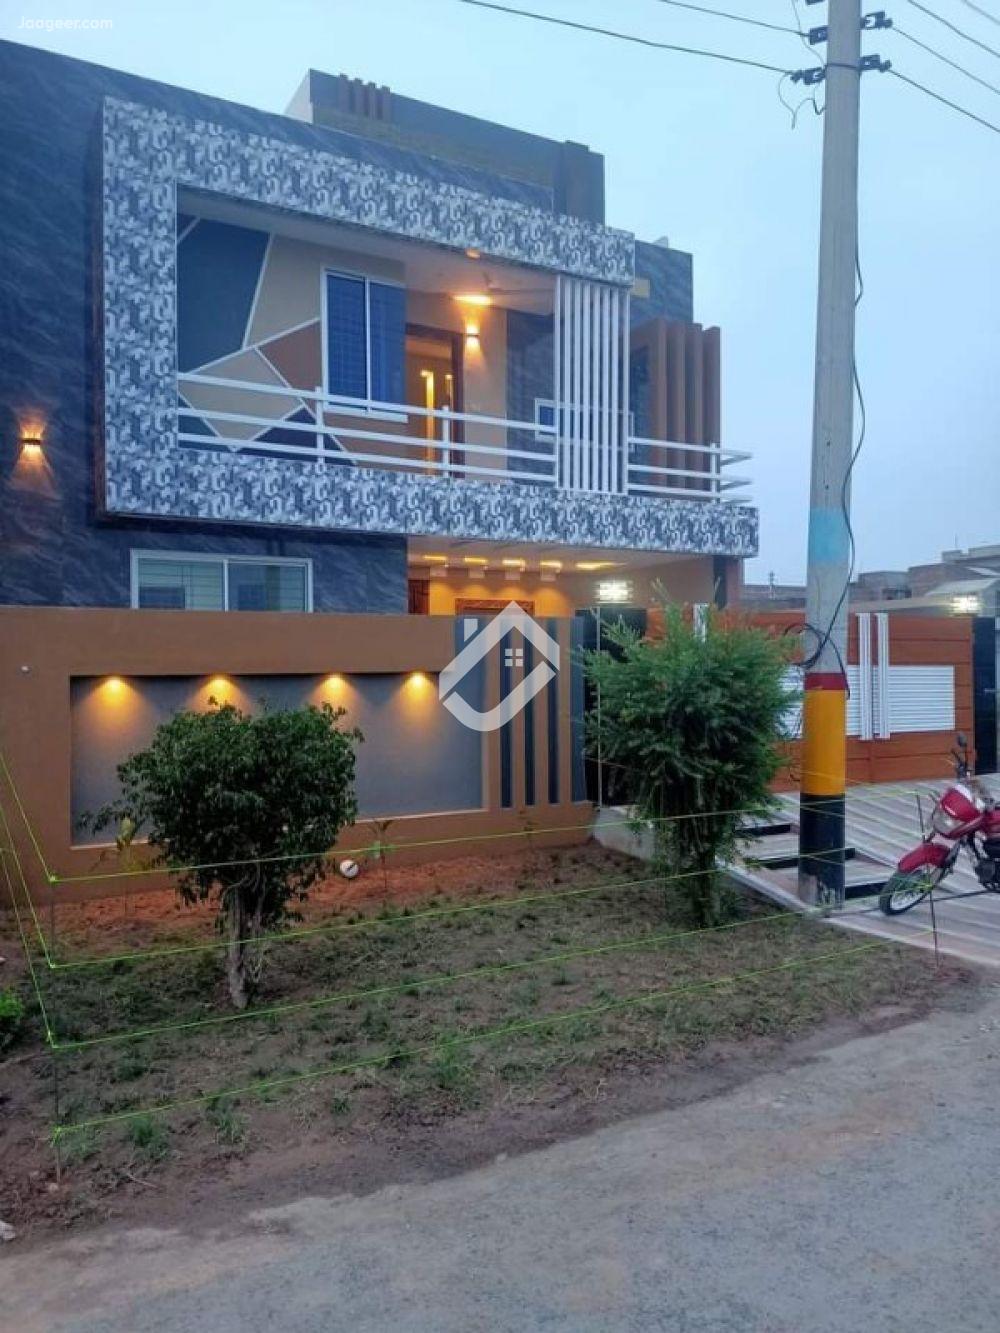 View  9 Marla Double Storey House For Sale In Life City in Life City, Bhalwal